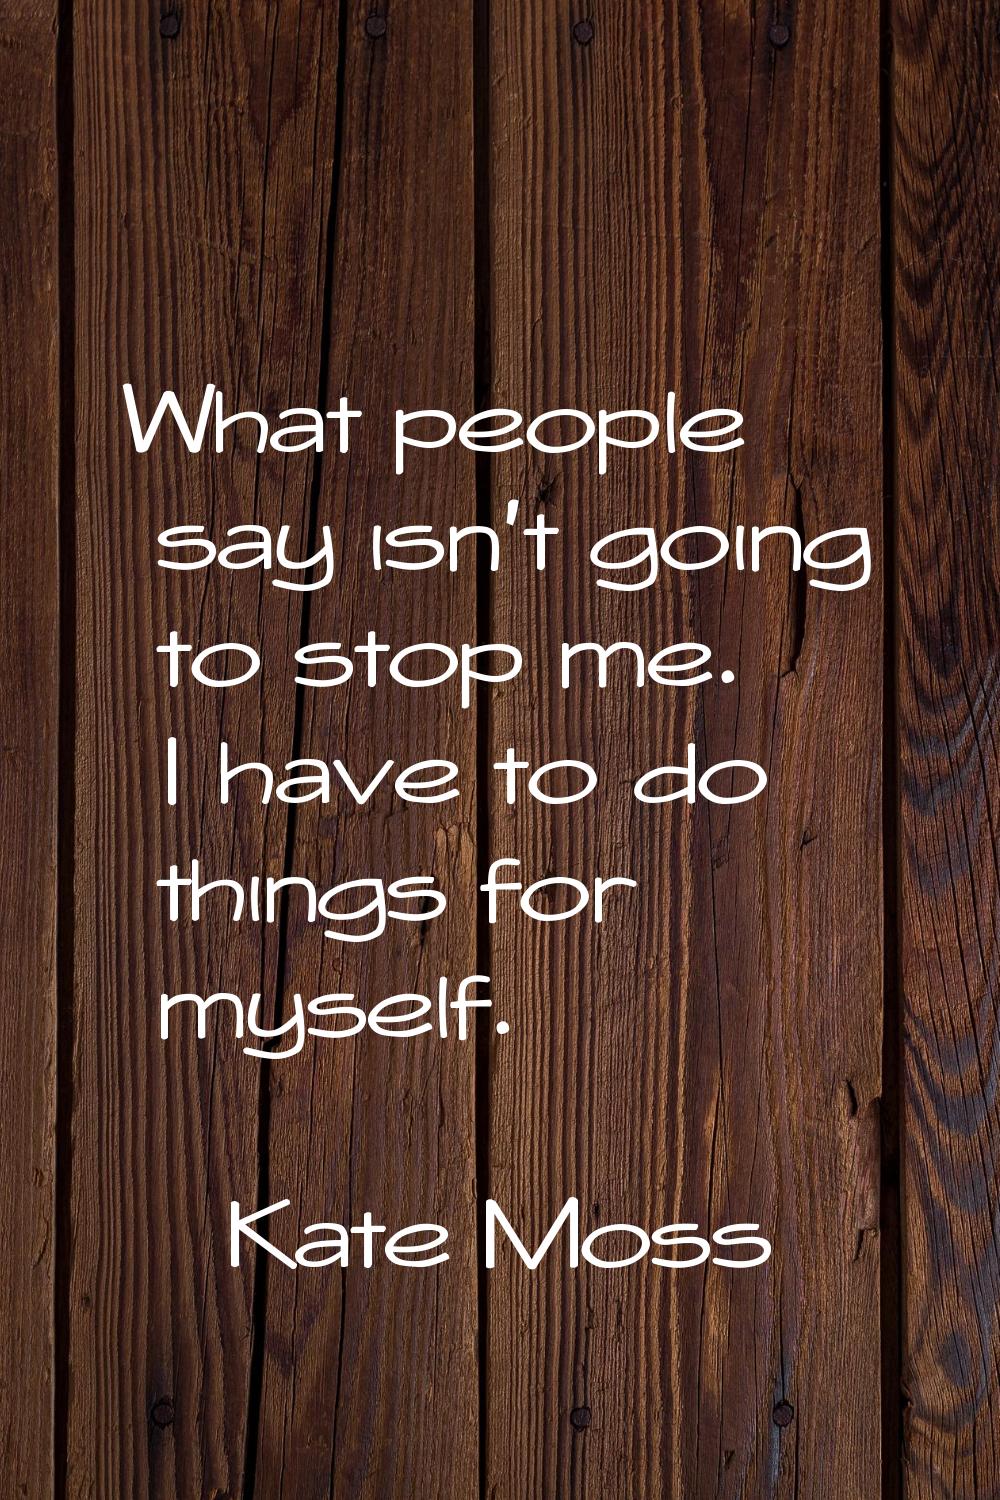 What people say isn't going to stop me. I have to do things for myself.